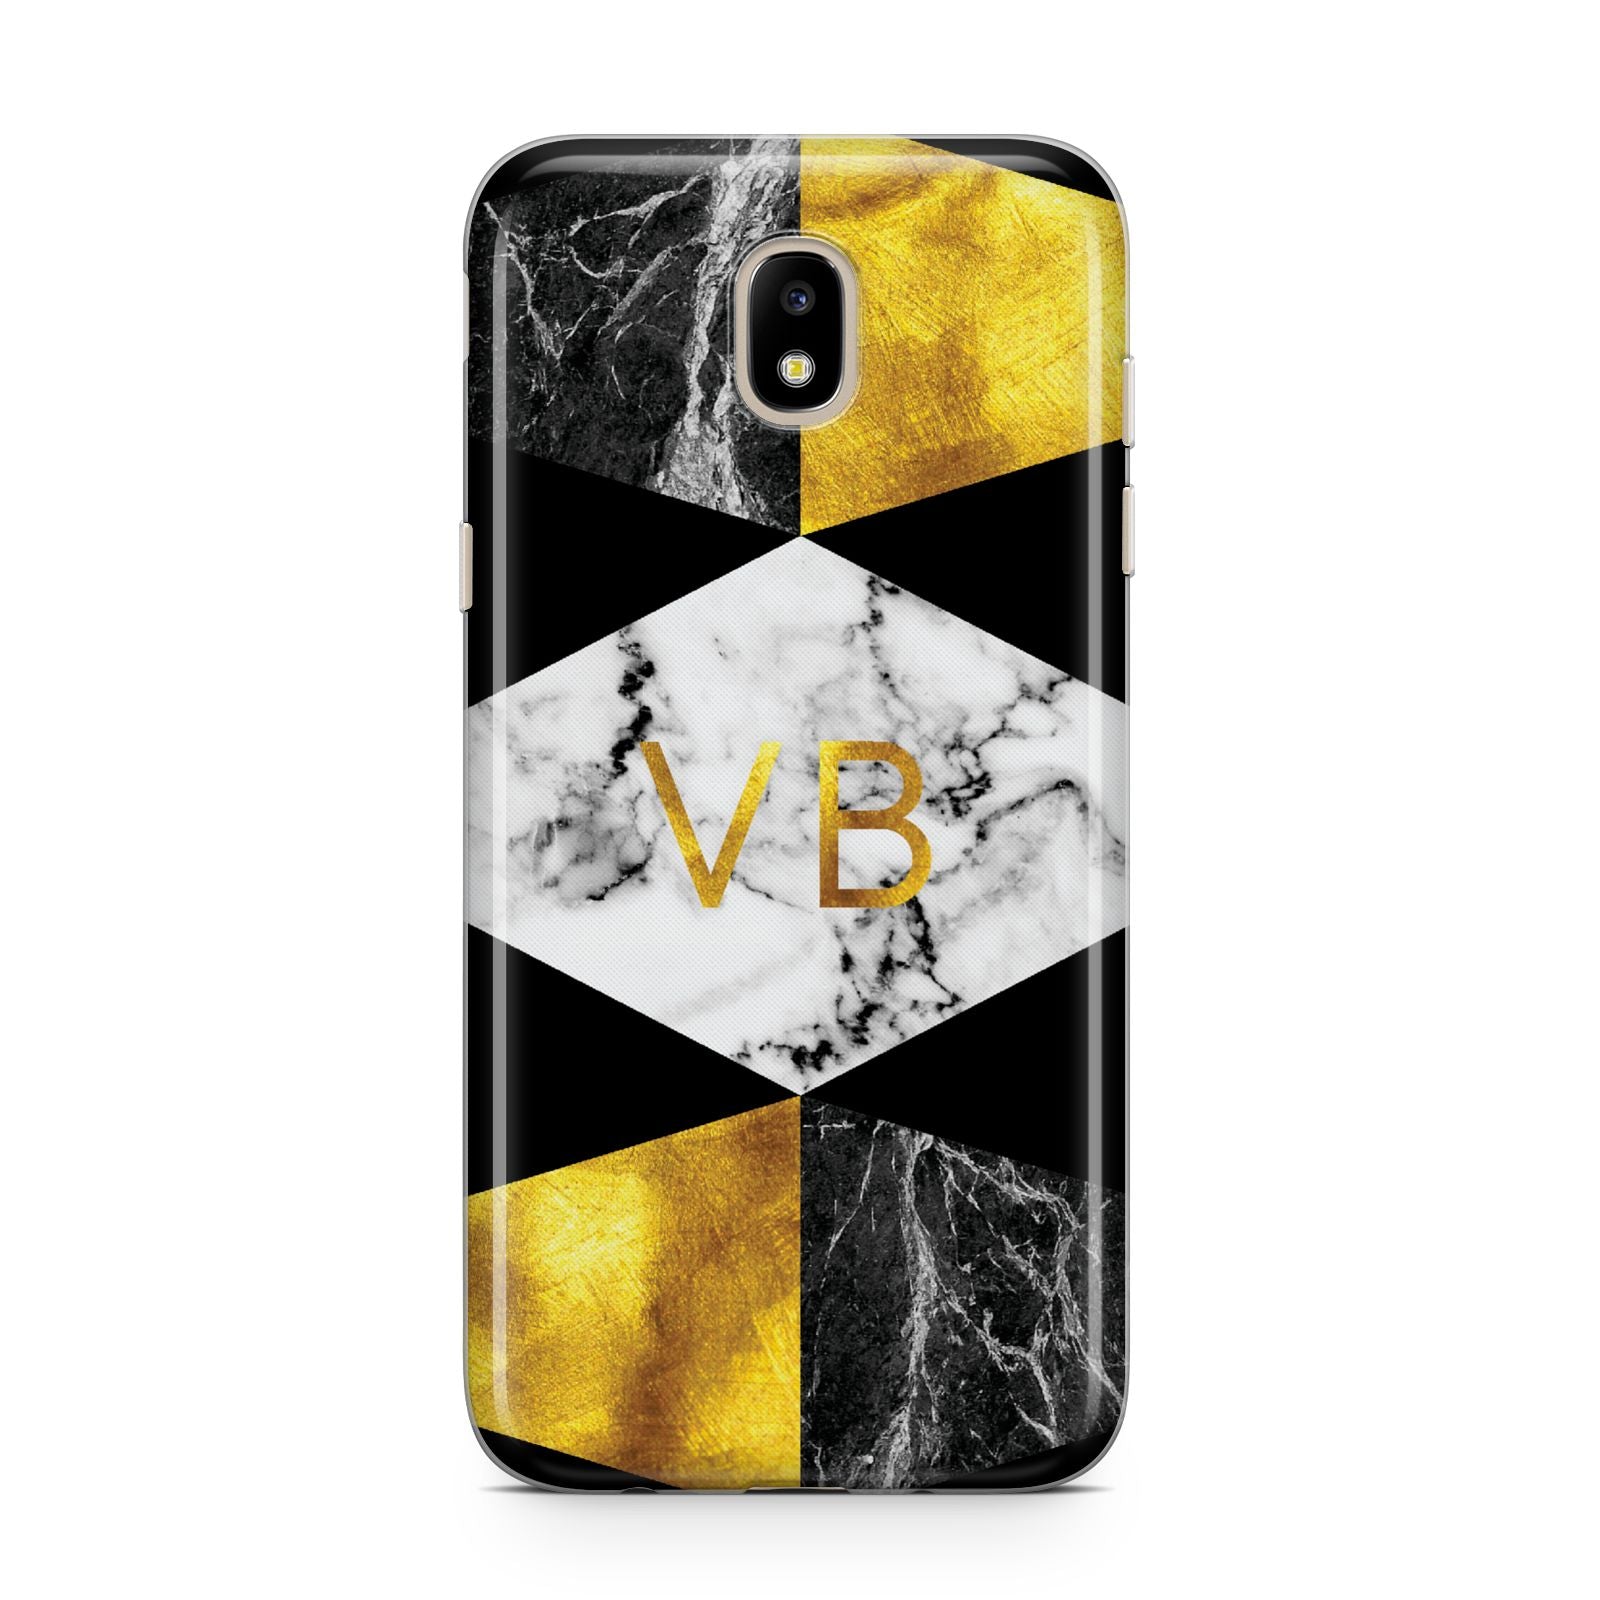 Personalised Gold Marble Initials Samsung J5 2017 Case